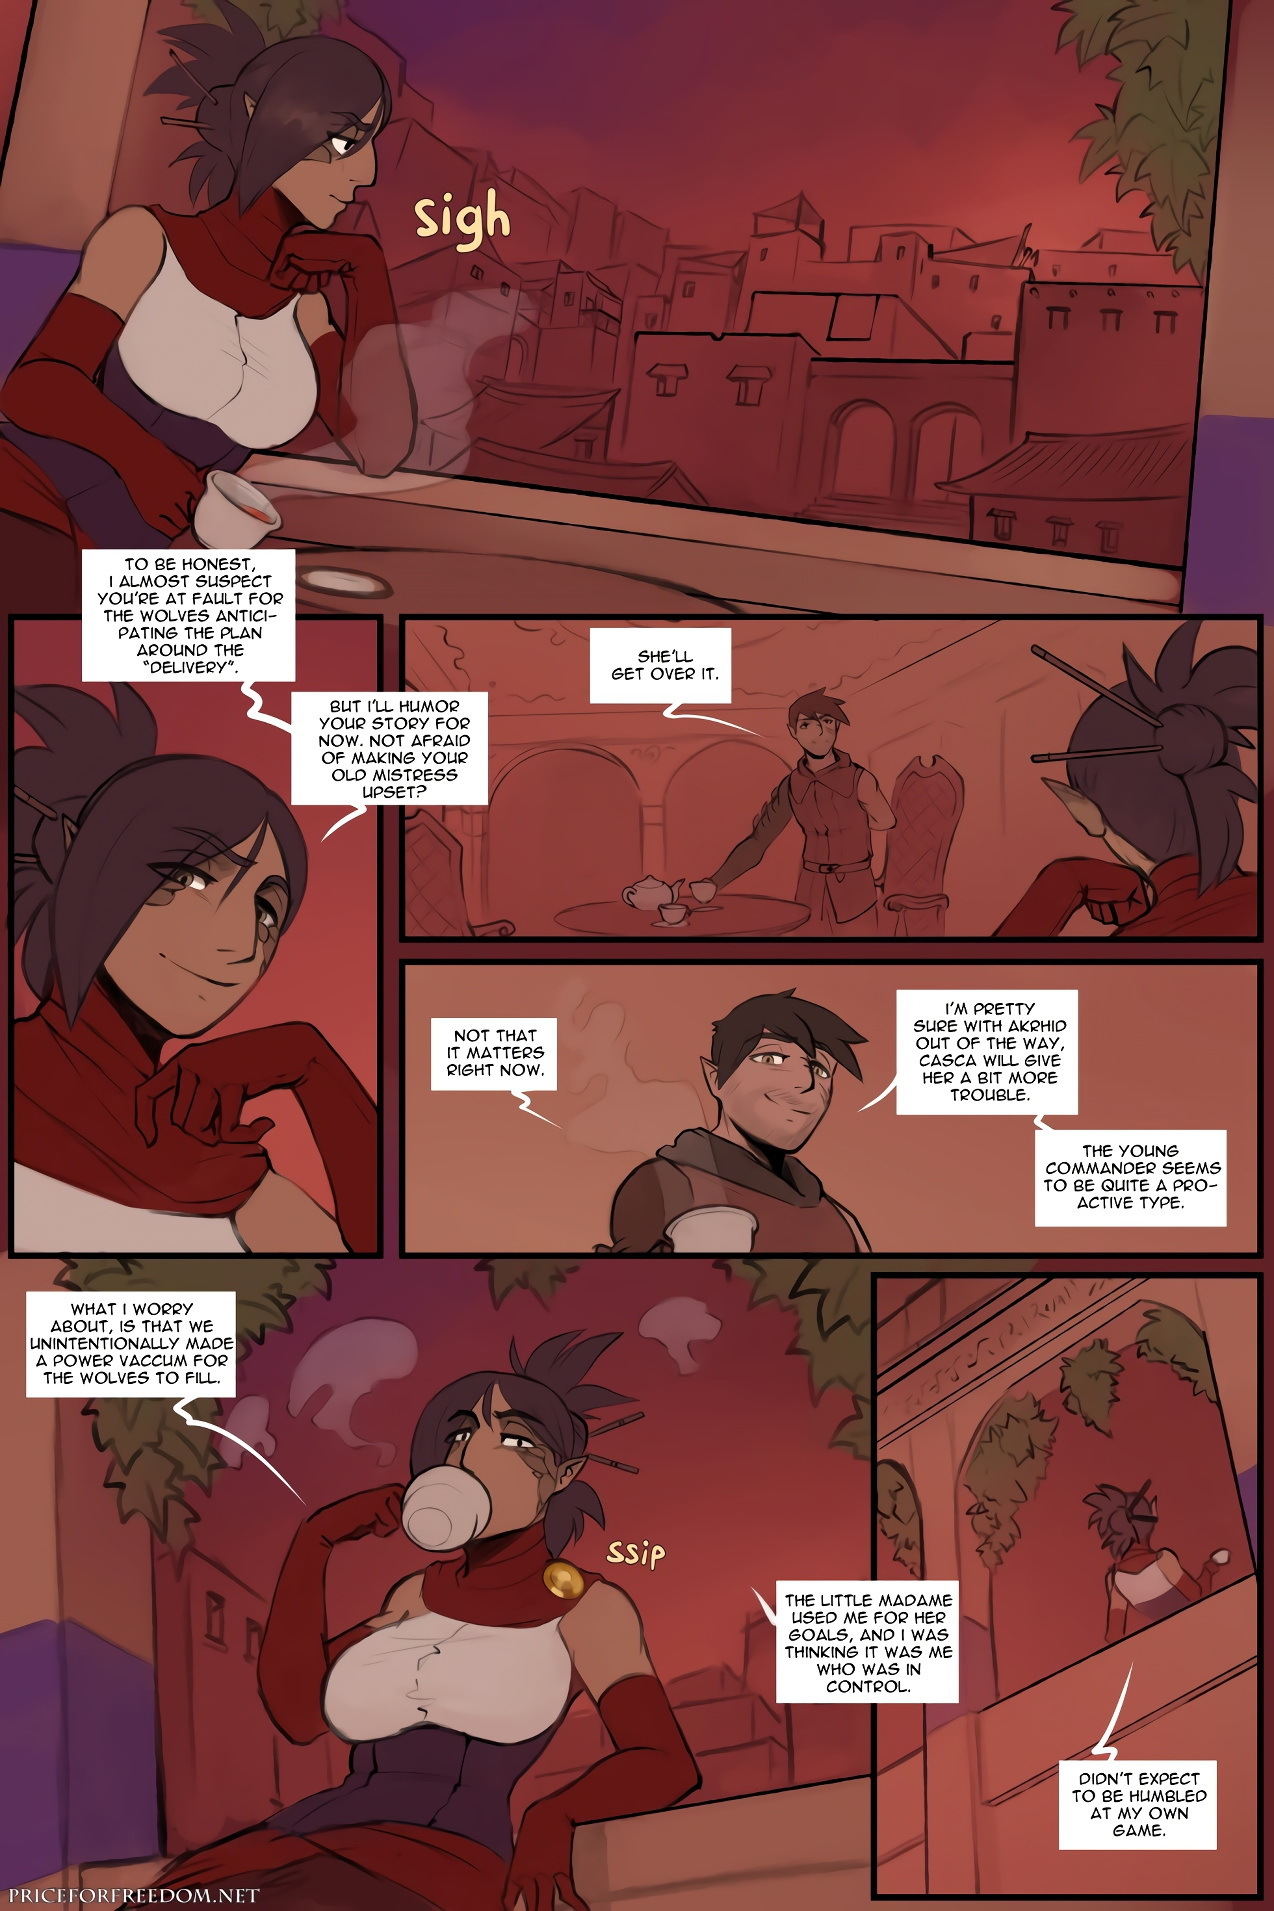 Price For Freedom - Page 374